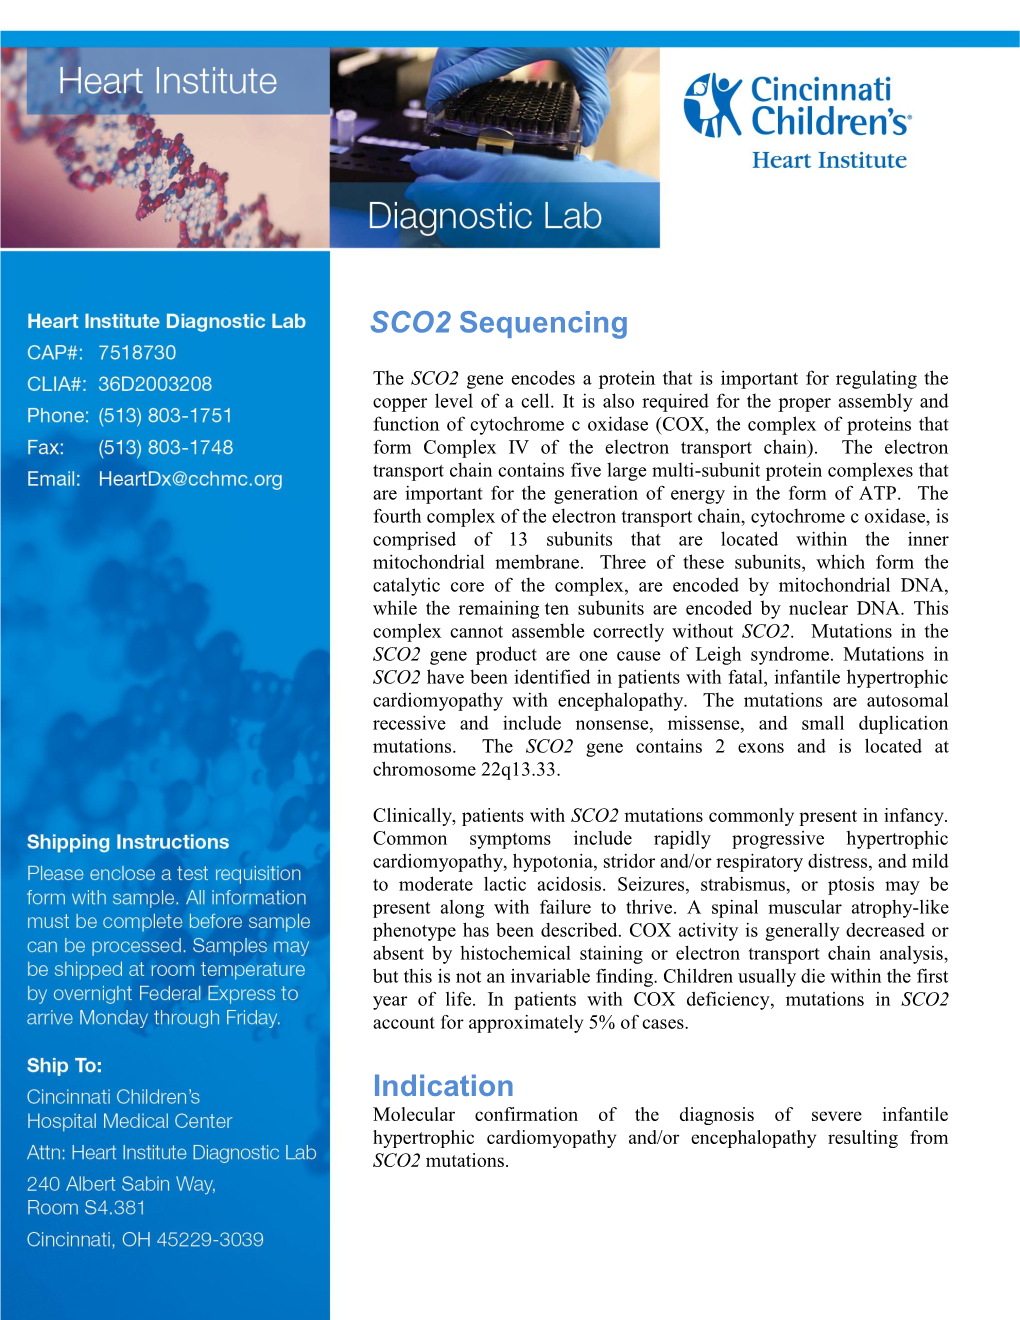 SCO2 Sequencing Indication